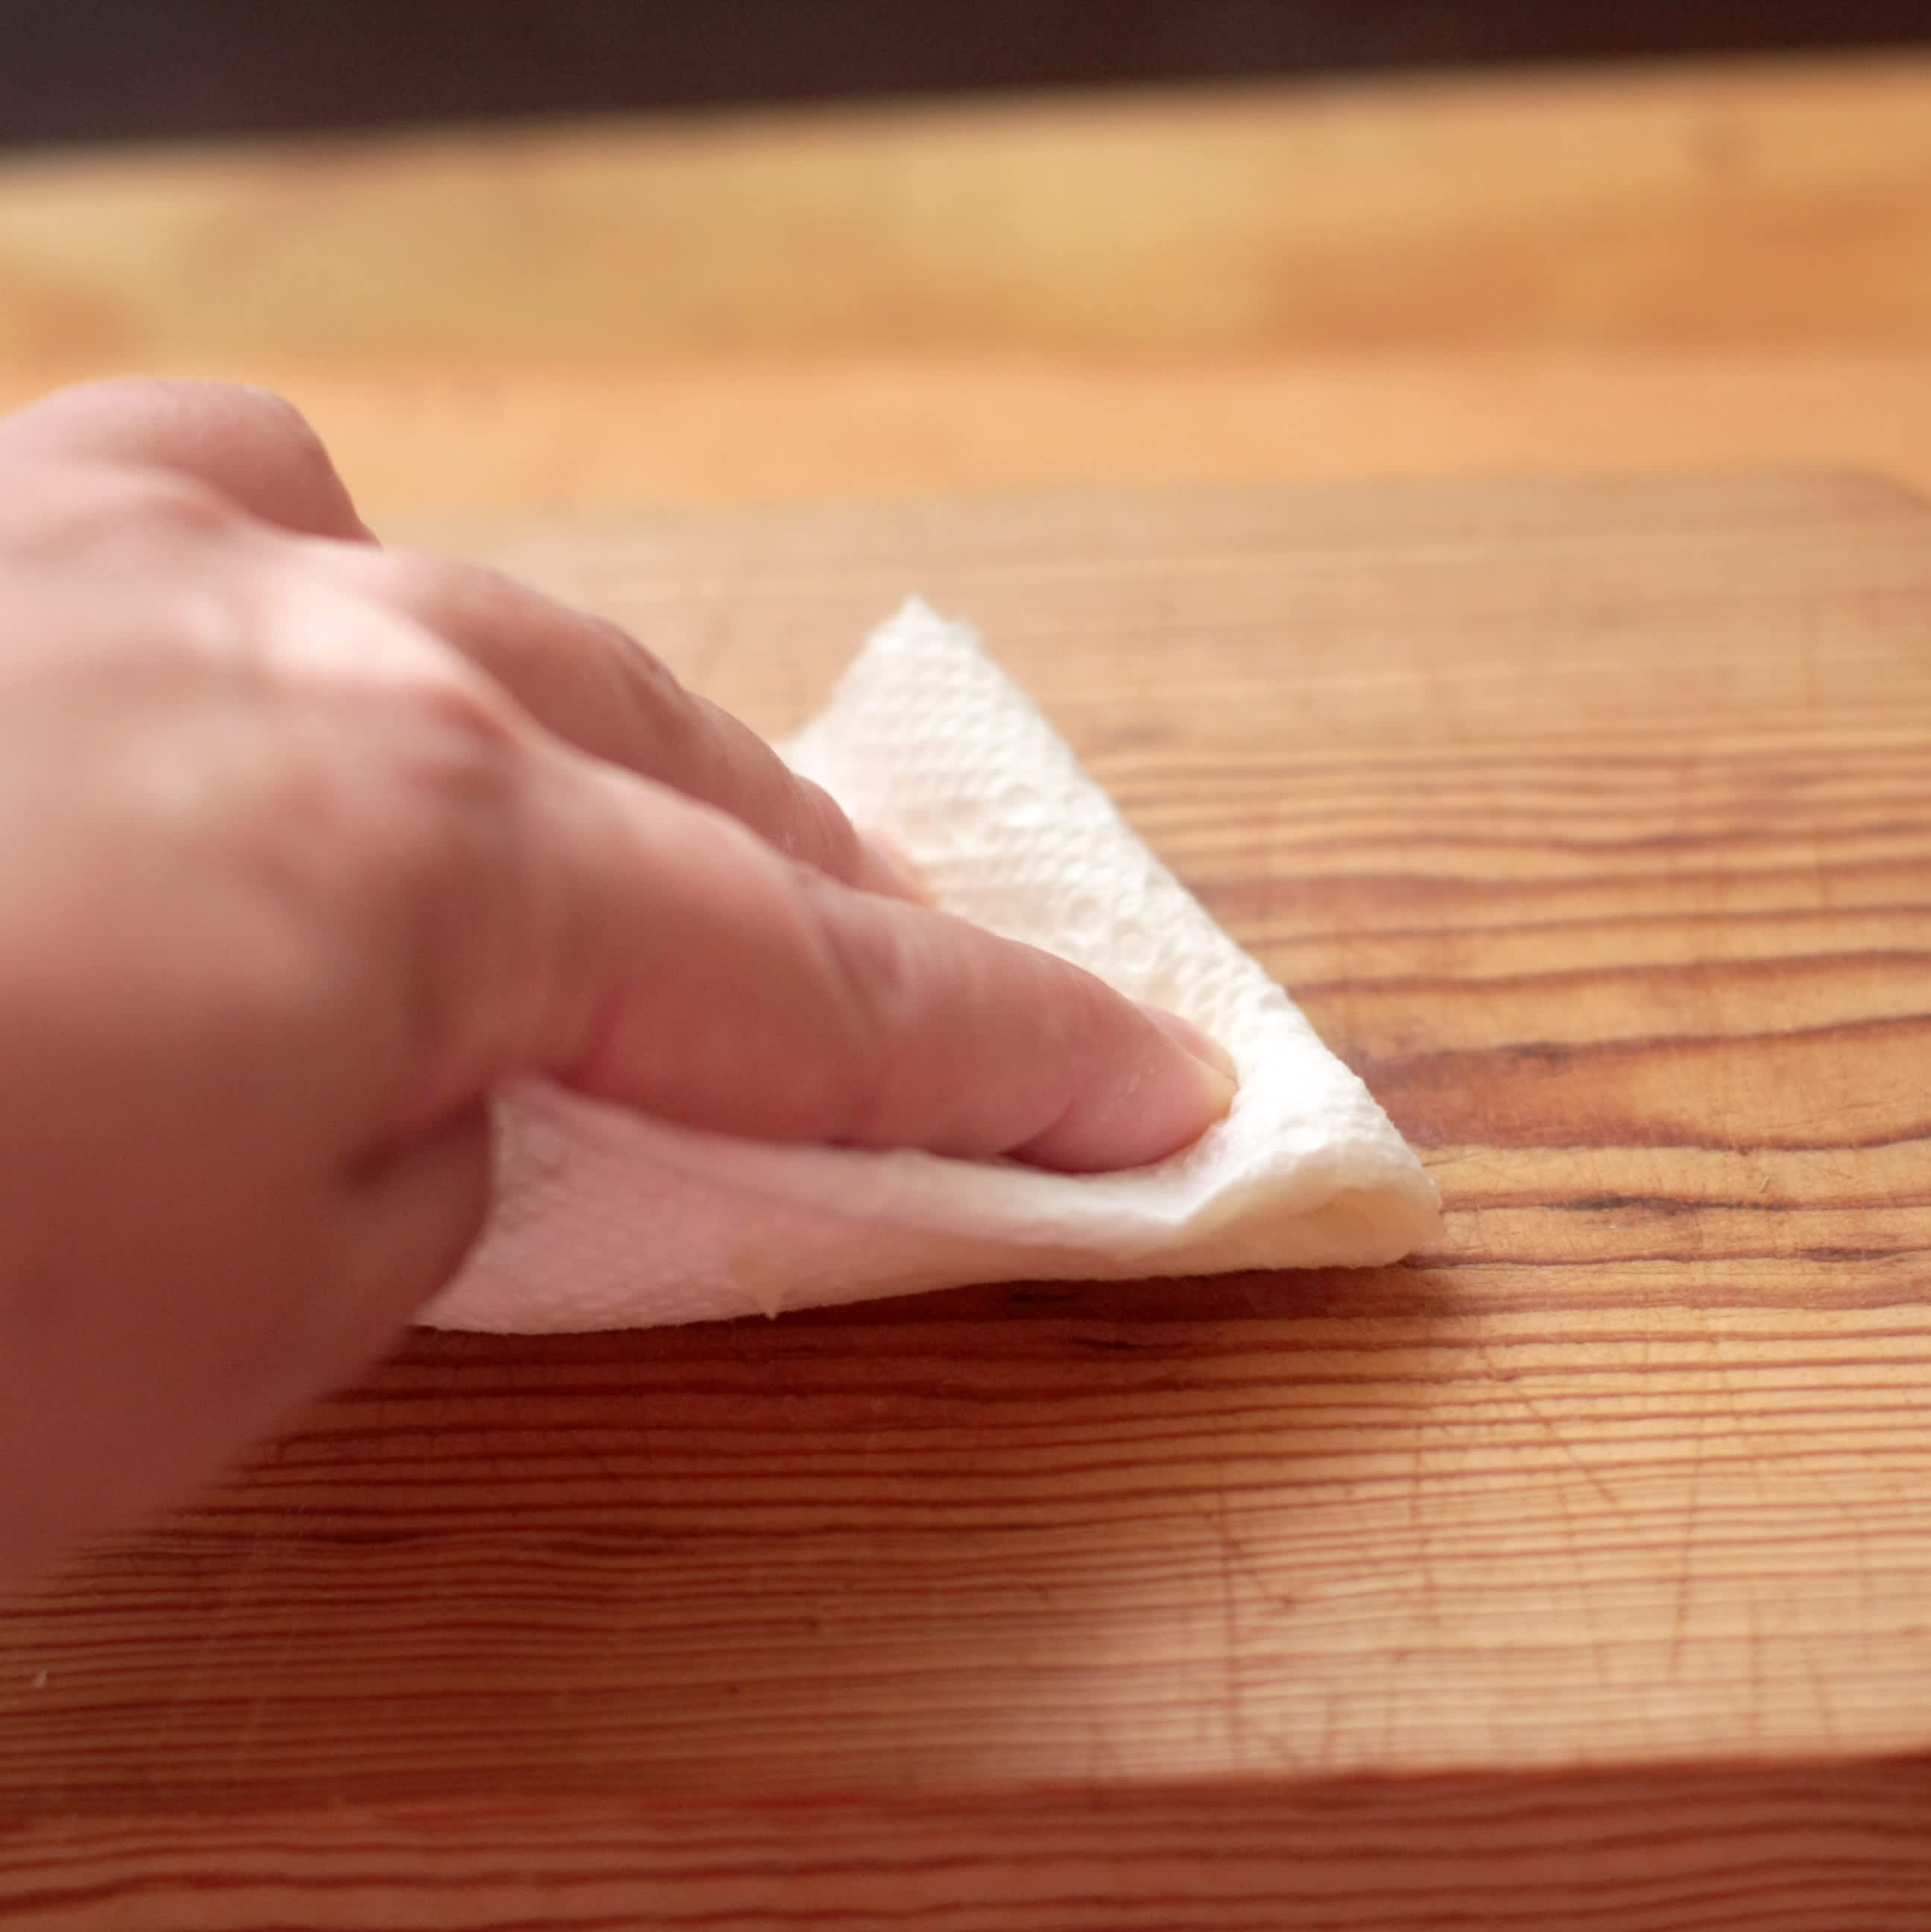 7 Horrible Things You're Doing To Your Cutting Boards